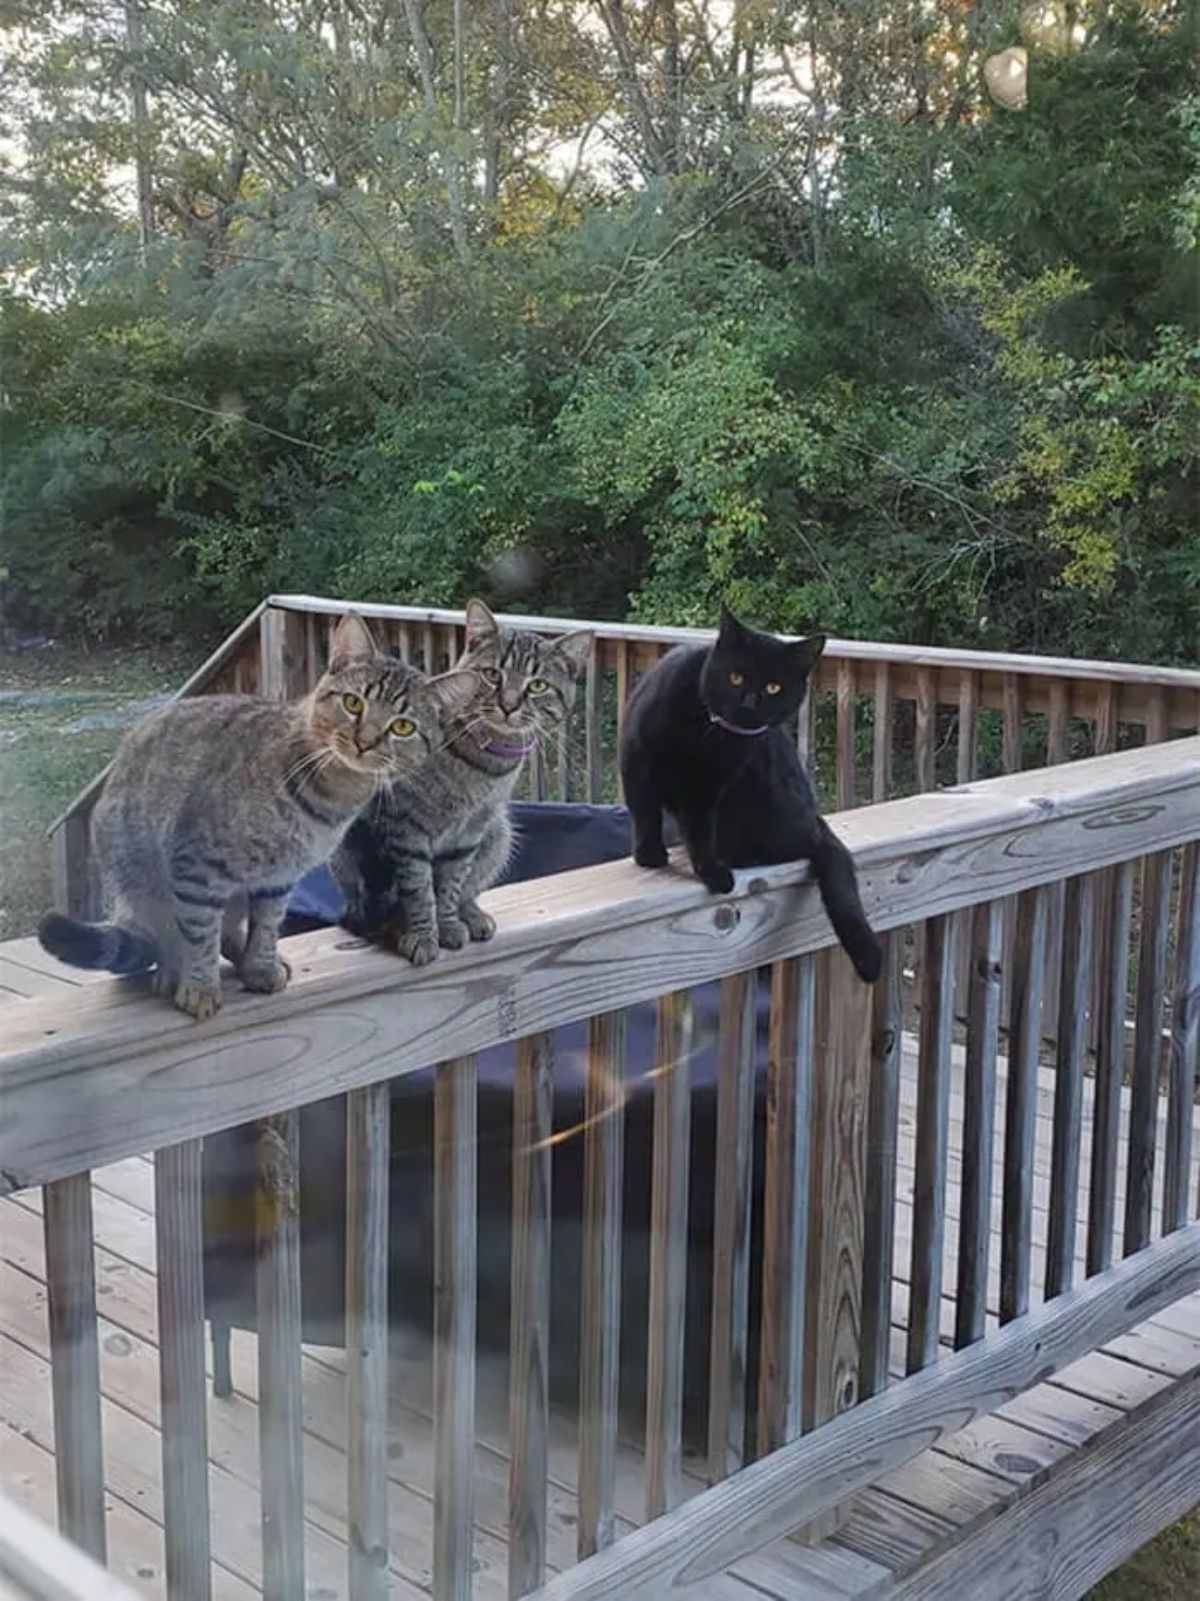 2 grey tabby cats and a black cat sitting on a wooden balcony post and looking into the house